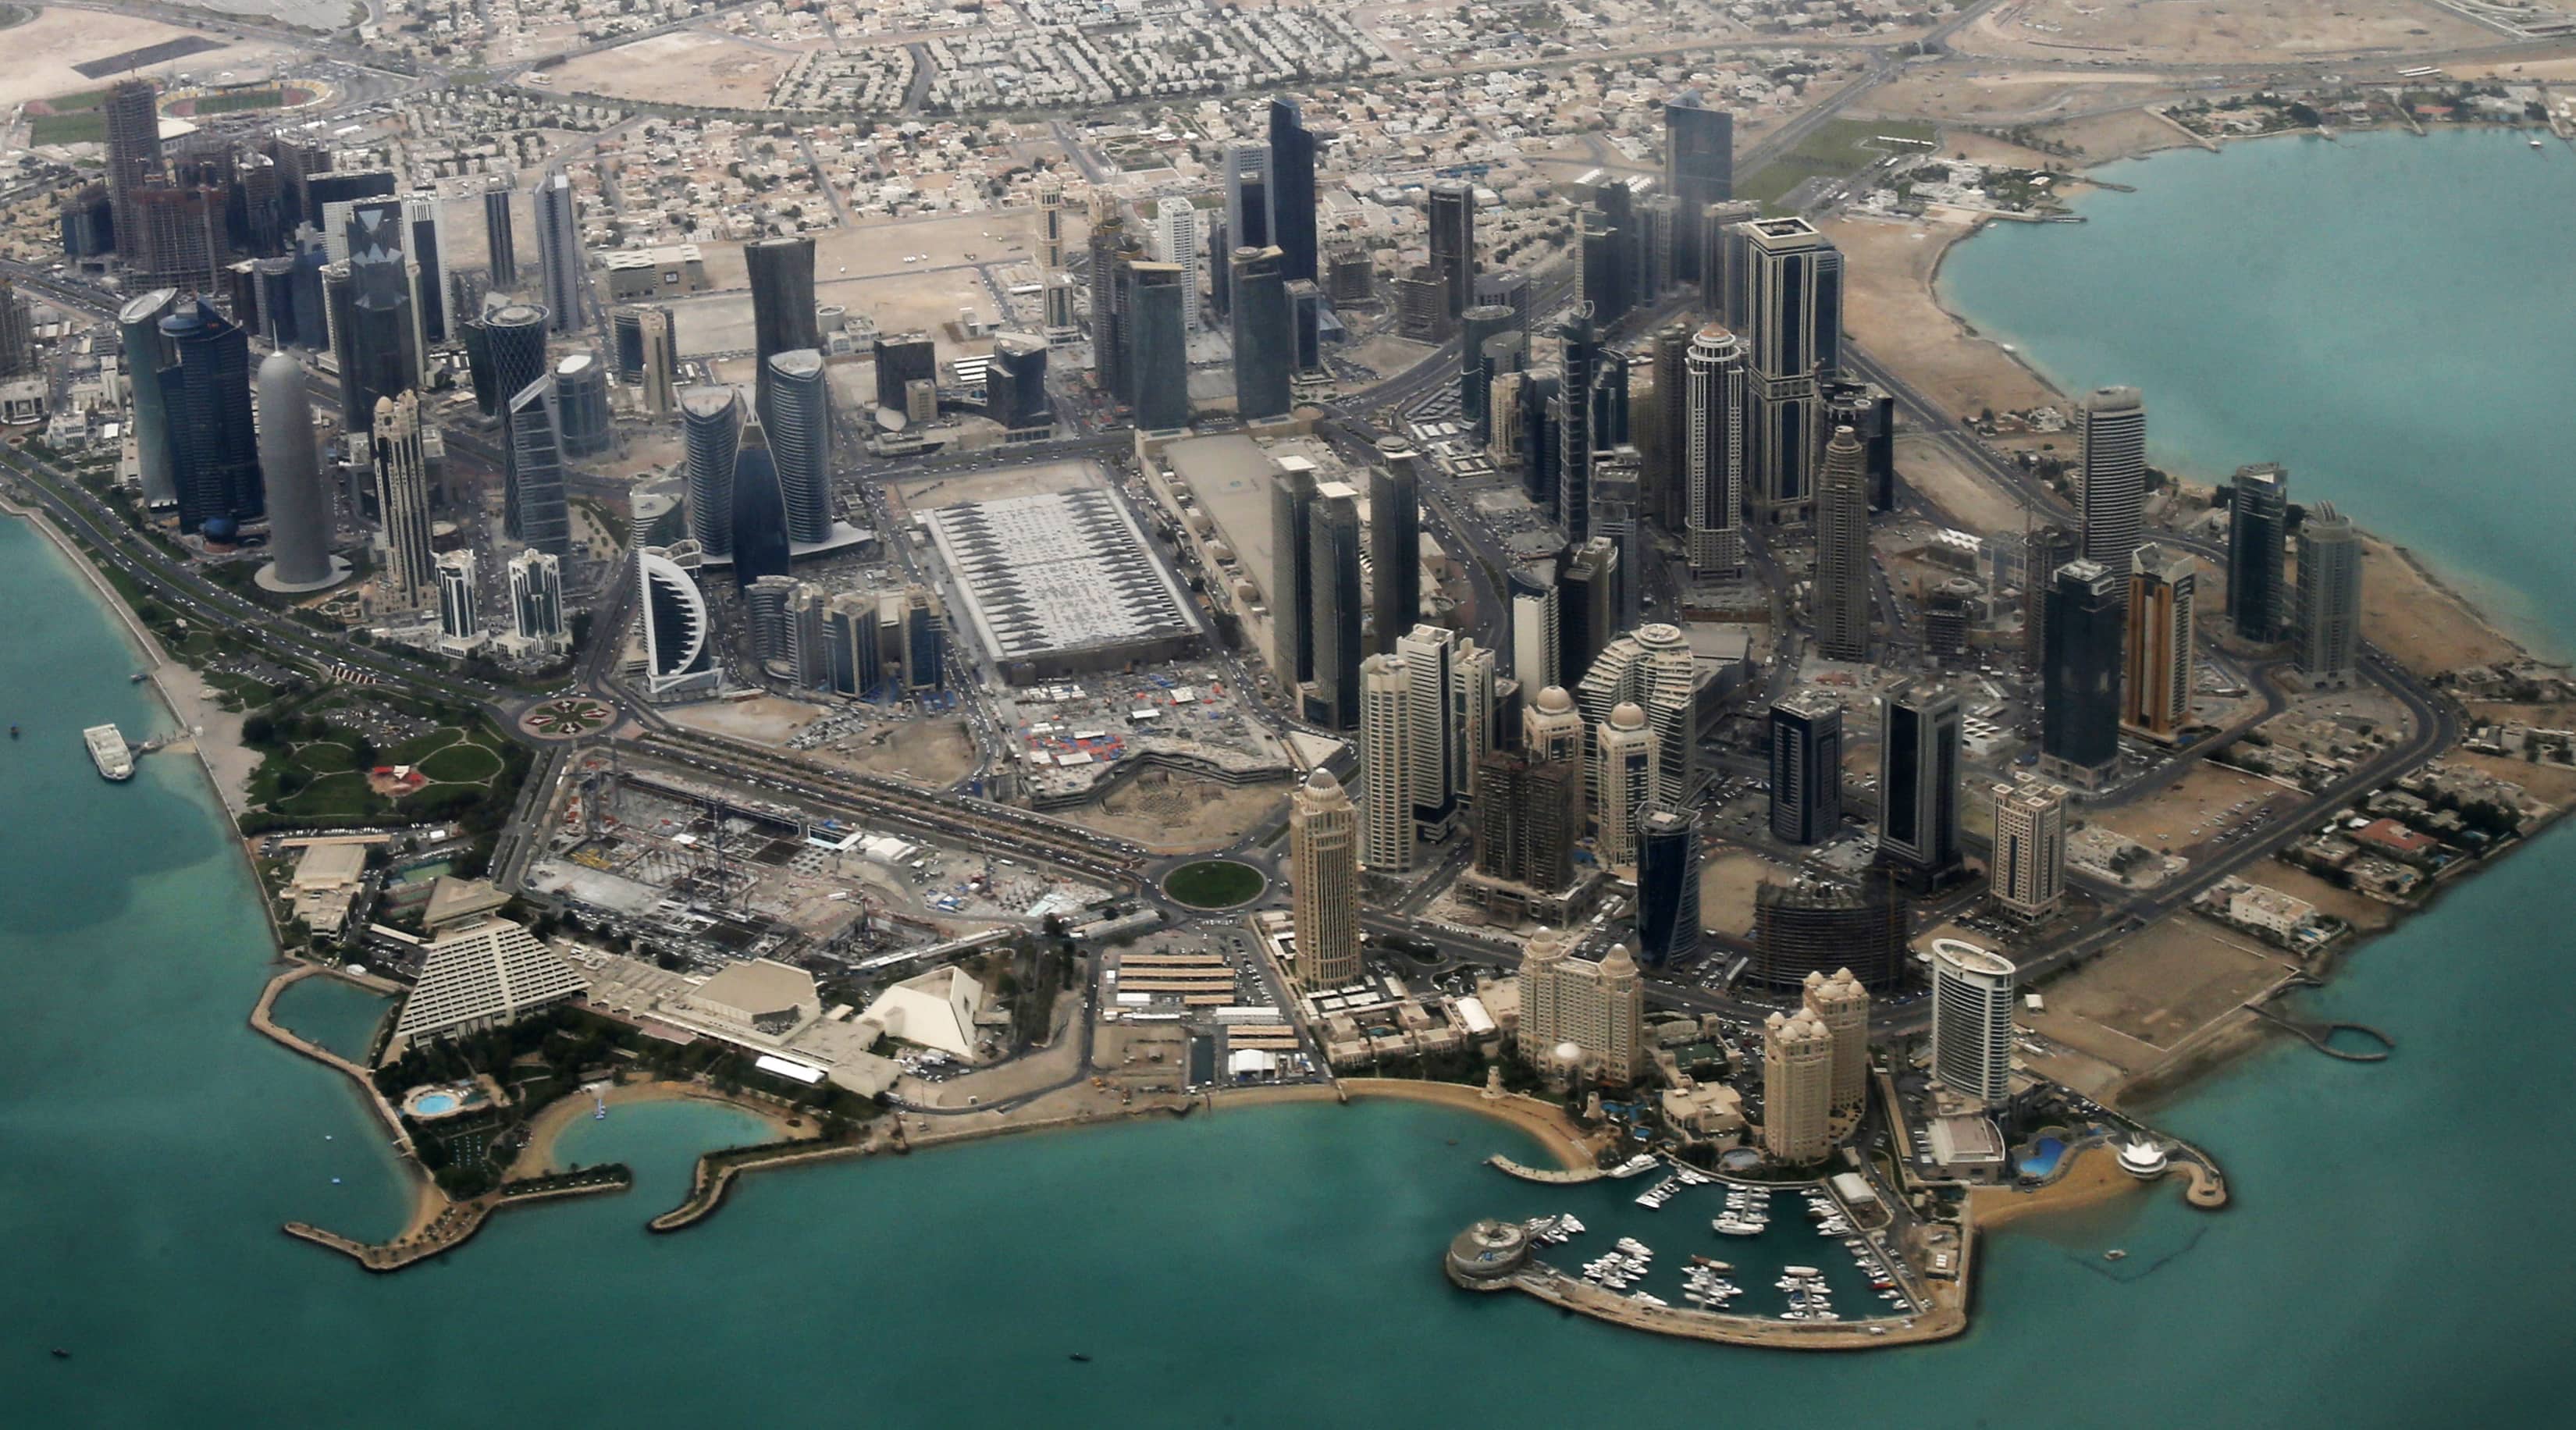 An aerial view of Doha's diplomatic area on 21 March 2013, REUTERS/Fadi Al-Assaad